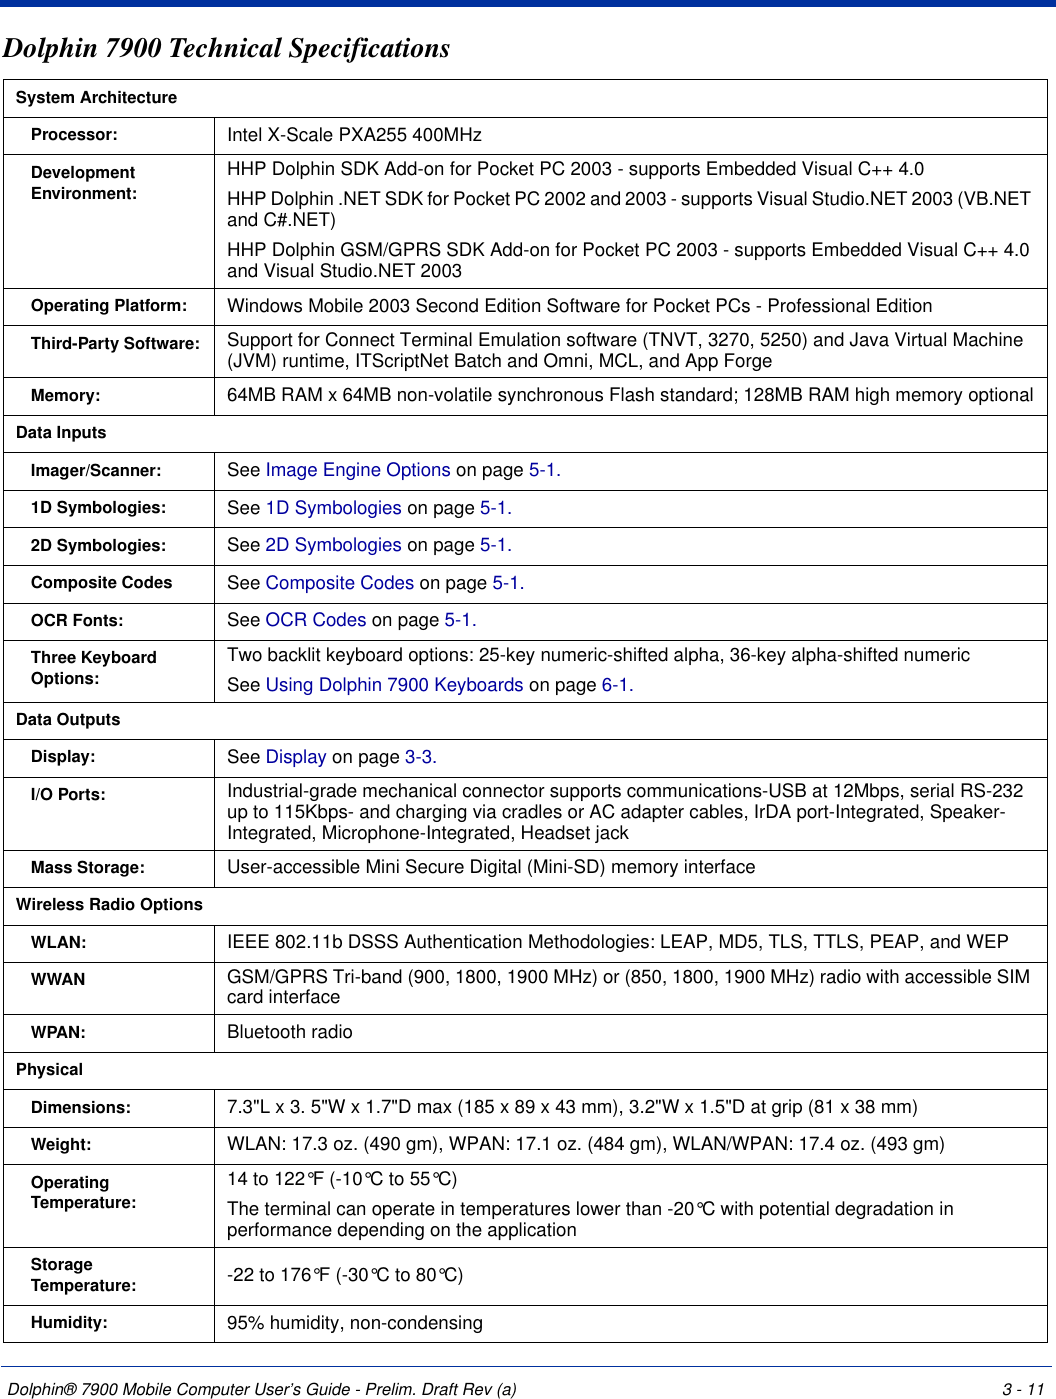 Dolphin® 7900 Mobile Computer User’s Guide - Prelim. Draft Rev (a) 3 - 11Dolphin 7900 Technical SpecificationsSystem ArchitectureProcessor: Intel X-Scale PXA255 400MHz Development Environment:HHP Dolphin SDK Add-on for Pocket PC 2003 - supports Embedded Visual C++ 4.0HHP Dolphin .NET SDK for Pocket PC 2002 and 2003 - supports Visual Studio.NET 2003 (VB.NET and C#.NET)HHP Dolphin GSM/GPRS SDK Add-on for Pocket PC 2003 - supports Embedded Visual C++ 4.0 and Visual Studio.NET 2003Operating Platform:  Windows Mobile 2003 Second Edition Software for Pocket PCs - Professional EditionThird-Party Software: Support for Connect Terminal Emulation software (TNVT, 3270, 5250) and Java Virtual Machine (JVM) runtime, ITScriptNet Batch and Omni, MCL, and App ForgeMemory: 64MB RAM x 64MB non-volatile synchronous Flash standard; 128MB RAM high memory optionalData InputsImager/Scanner: See Image Engine Options on page 5-1.1D Symbologies: See 1D Symbologies on page 5-1.2D Symbologies: See 2D Symbologies on page 5-1.Composite Codes See Composite Codes on page 5-1.OCR Fonts: See OCR Codes on page 5-1.Three Keyboard Options:Two backlit keyboard options: 25-key numeric-shifted alpha, 36-key alpha-shifted numericSee Using Dolphin 7900 Keyboards on page 6-1.Data OutputsDisplay: See Display on page 3-3.I/O Ports: Industrial-grade mechanical connector supports communications-USB at 12Mbps, serial RS-232 up to 115Kbps- and charging via cradles or AC adapter cables, IrDA port-Integrated, Speaker-Integrated, Microphone-Integrated, Headset jackMass Storage: User-accessible Mini Secure Digital (Mini-SD) memory interfaceWireless Radio OptionsWLAN:  IEEE 802.11b DSSS Authentication Methodologies: LEAP, MD5, TLS, TTLS, PEAP, and WEPWWAN GSM/GPRS Tri-band (900, 1800, 1900 MHz) or (850, 1800, 1900 MHz) radio with accessible SIM card interfaceWPAN: Bluetooth radioPhysical Dimensions: 7.3&quot;L x 3. 5&quot;W x 1.7&quot;D max (185 x 89 x 43 mm), 3.2&quot;W x 1.5&quot;D at grip (81 x 38 mm)Weight: WLAN: 17.3 oz. (490 gm), WPAN: 17.1 oz. (484 gm), WLAN/WPAN: 17.4 oz. (493 gm)Operating Temperature: 14 to 122°F (-10°C to 55°C)The terminal can operate in temperatures lower than -20°C with potential degradation in performance depending on the applicationStorage Temperature:  -22 to 176°F (-30°C to 80°C)Humidity:  95% humidity, non-condensing